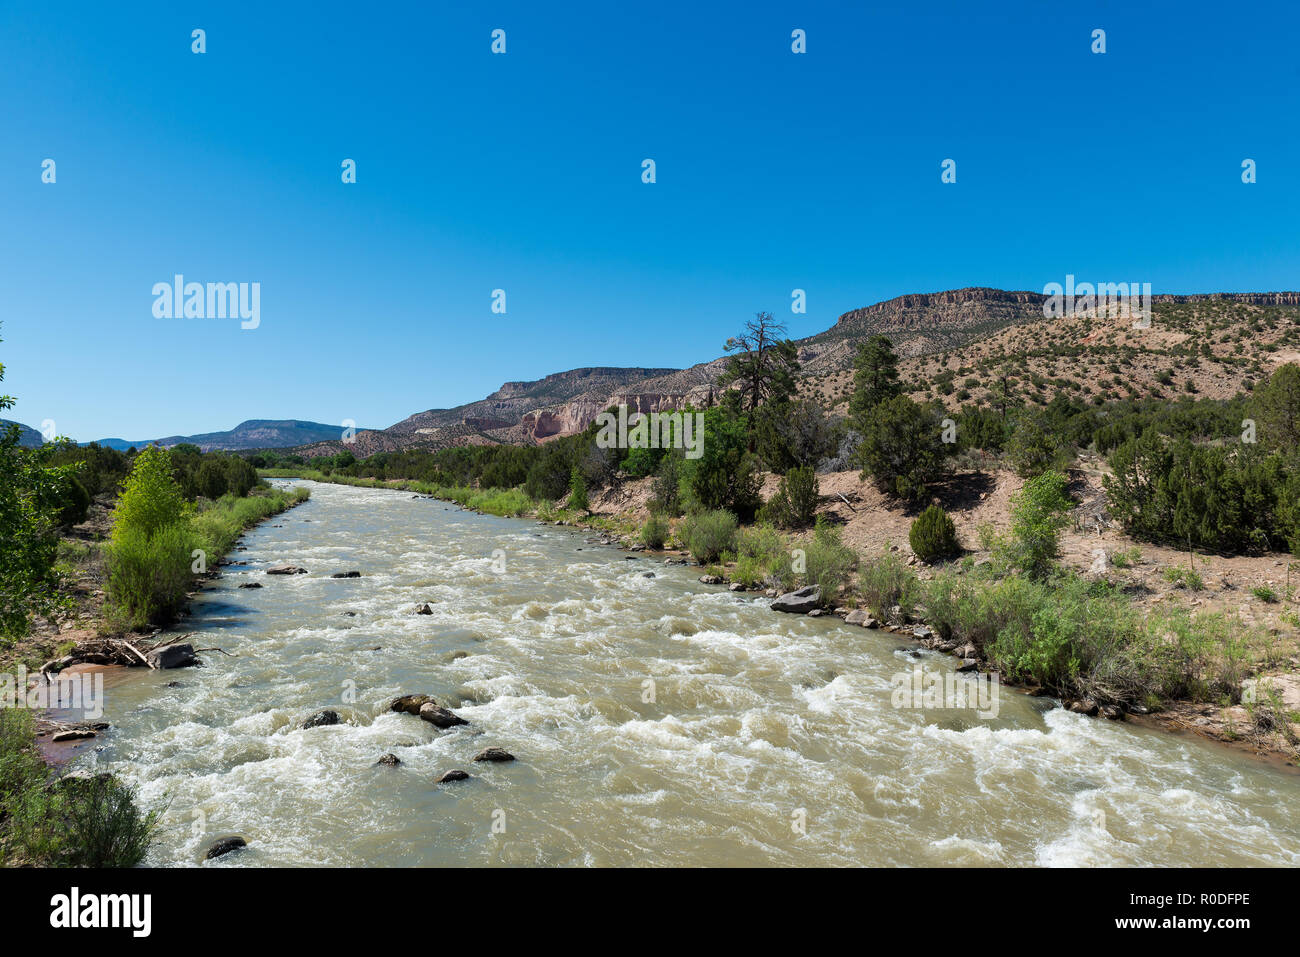 Chama River near Abiquiú, New Mexico is a Tourist and Rafting Destination with Rapids. Stock Photo